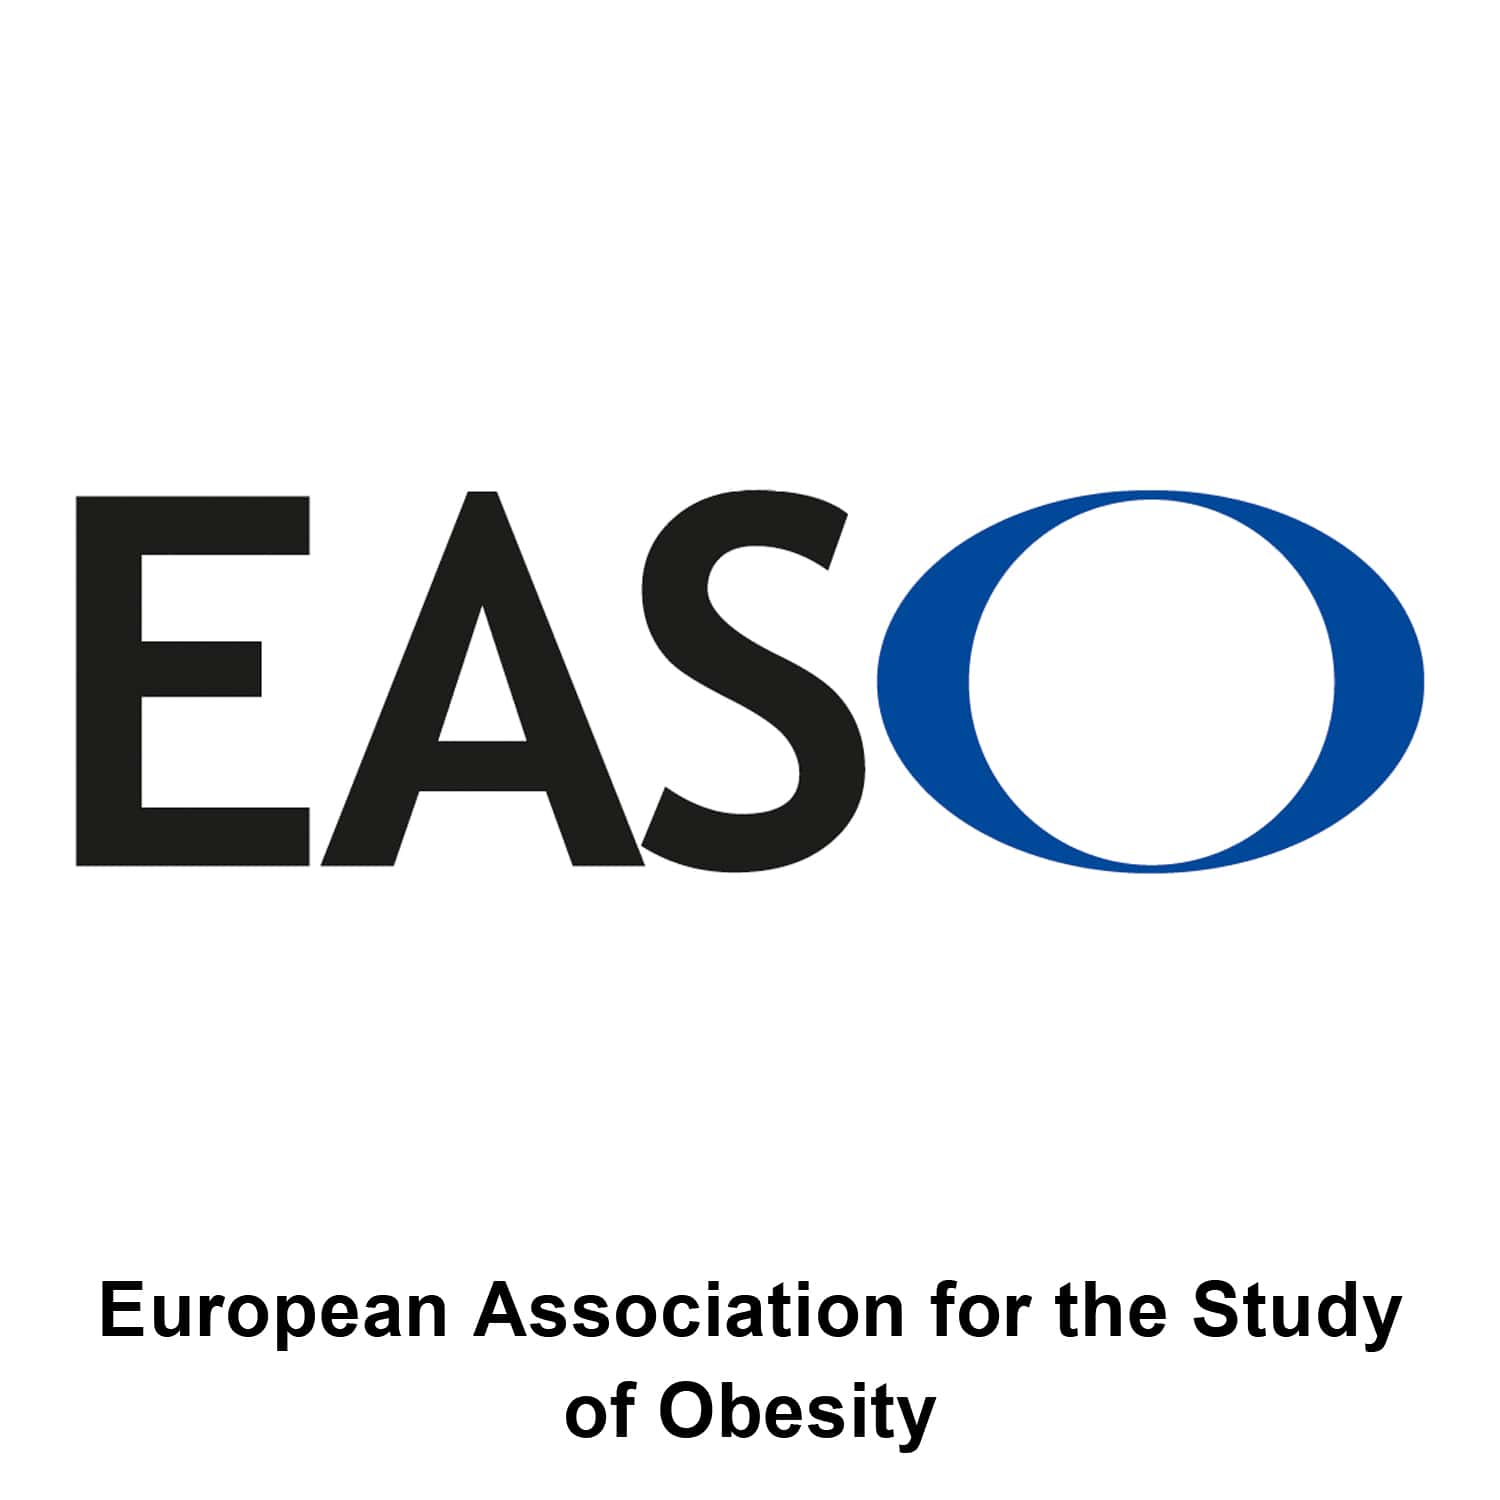 European Association for the Study of Obesity - EASO